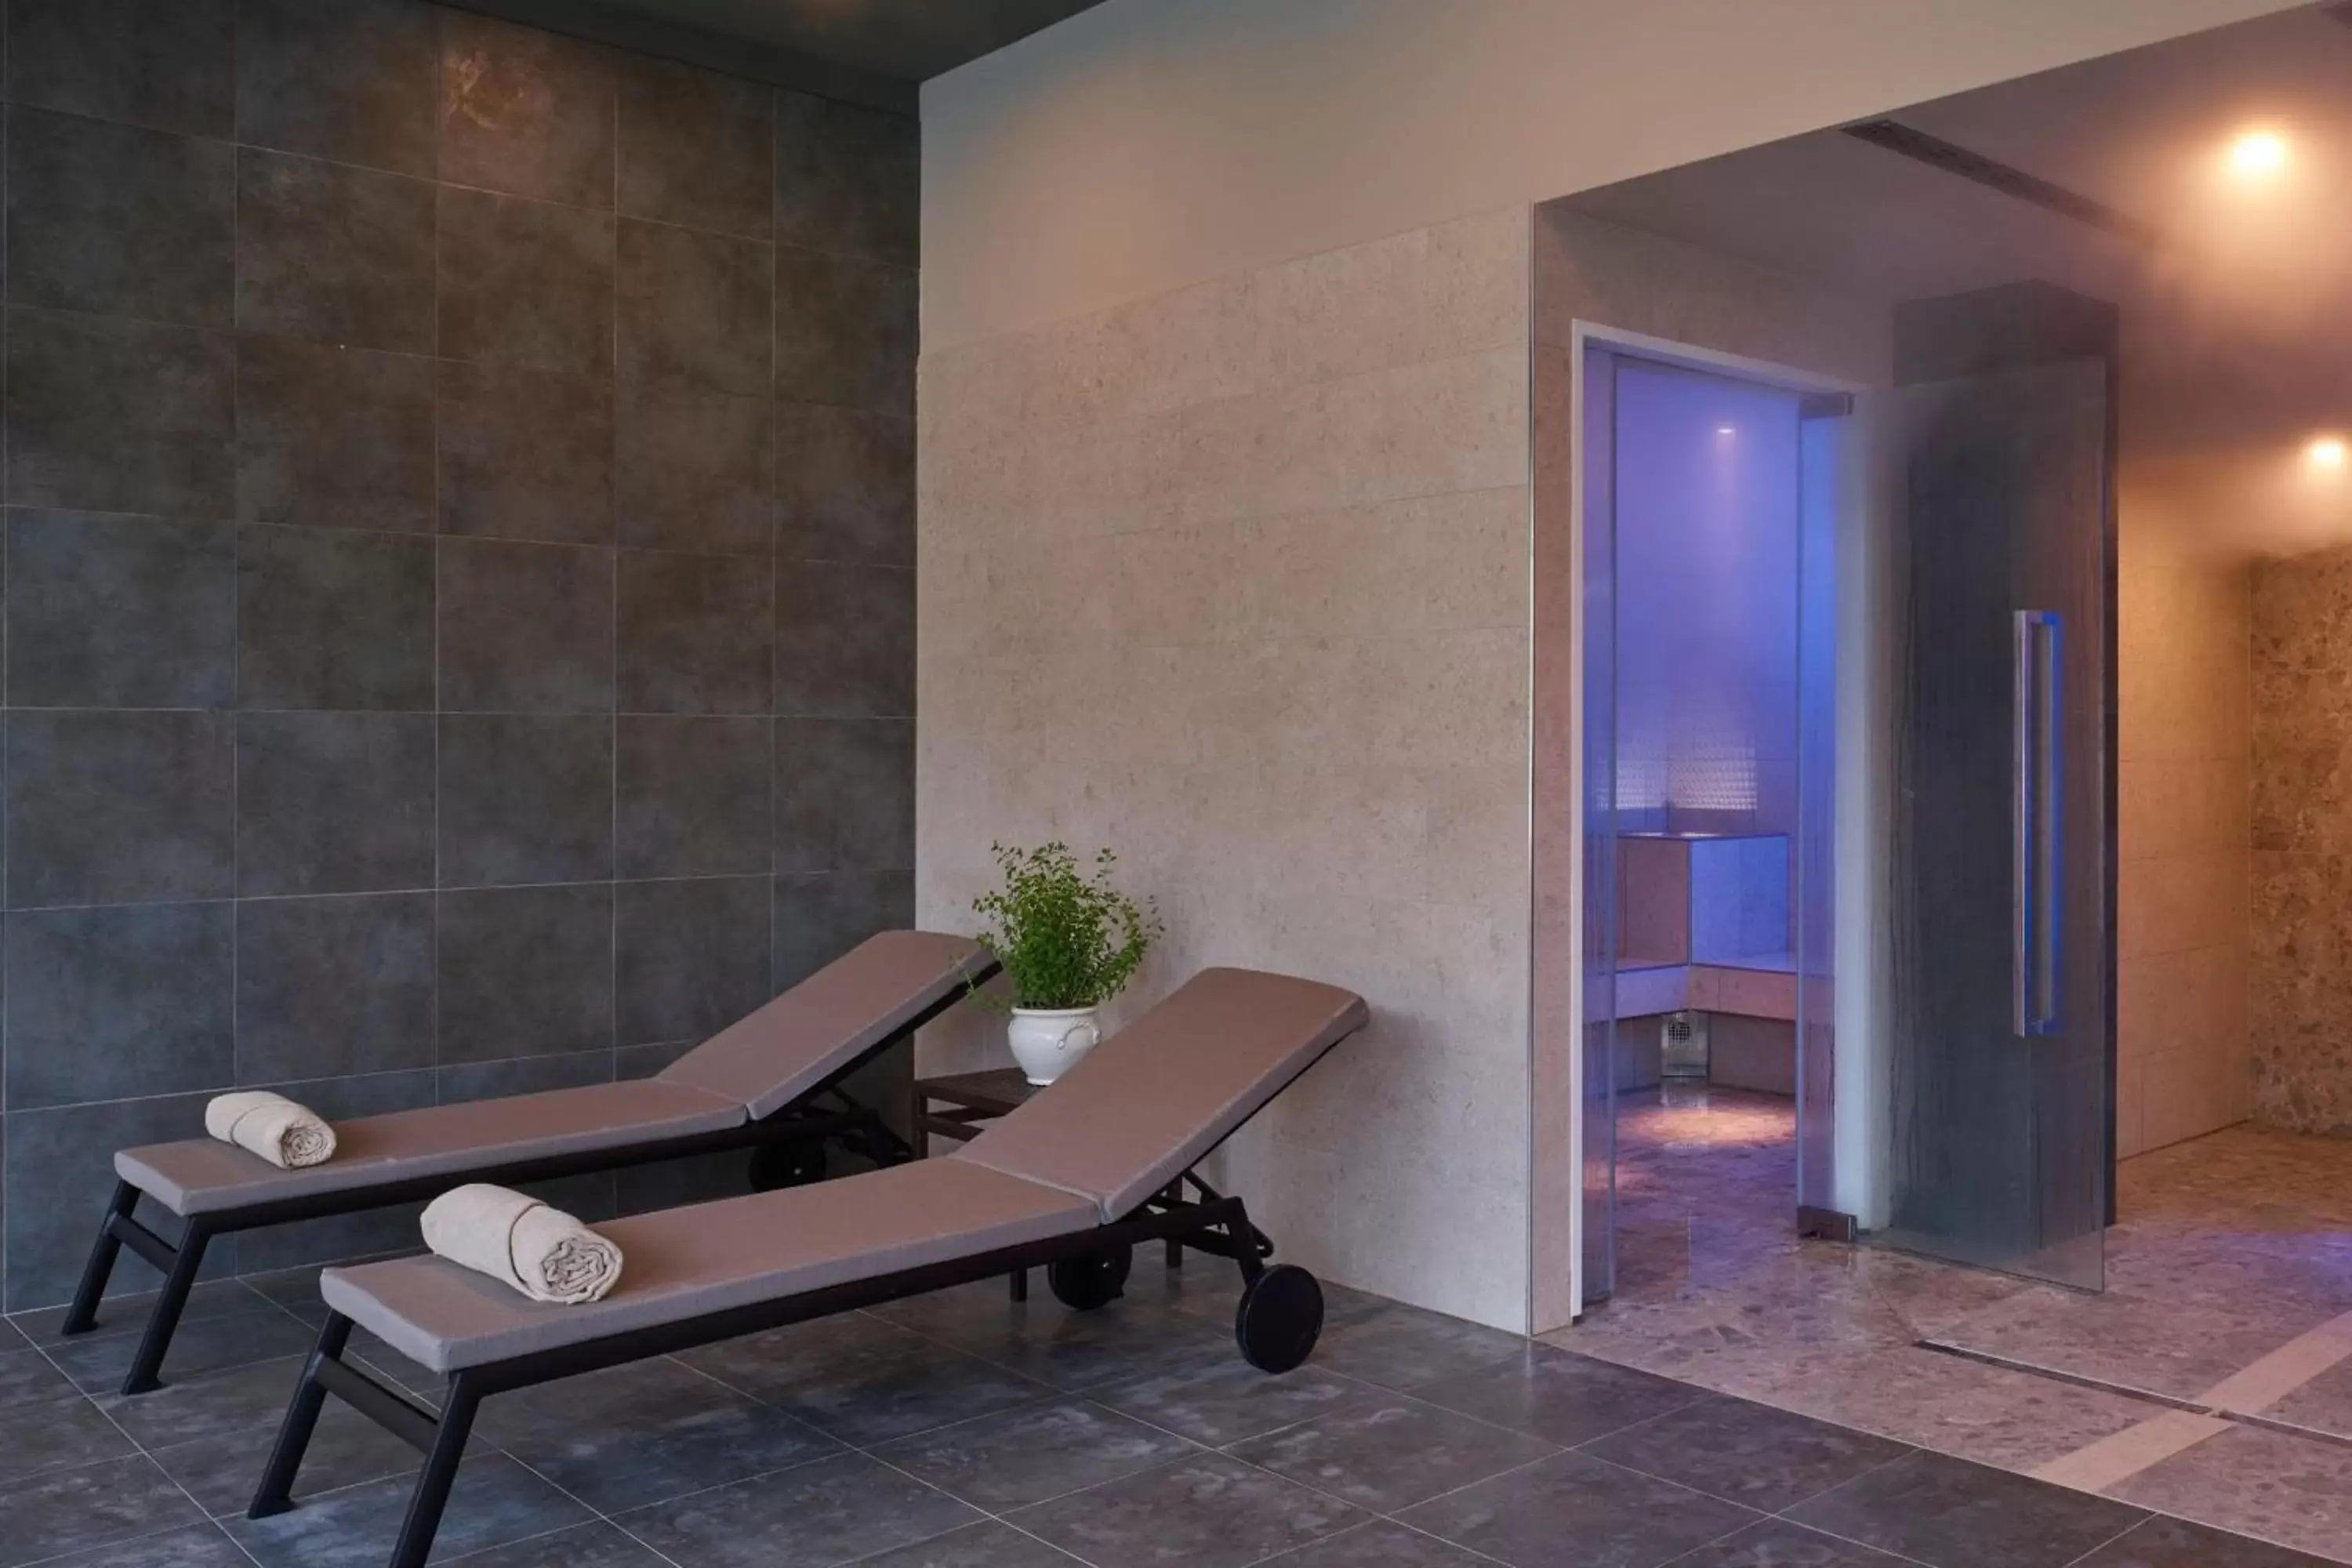 Spa and wellness centre/facilities in Grotta Giusti Thermal Spa Resort Tuscany, Autograph Collection